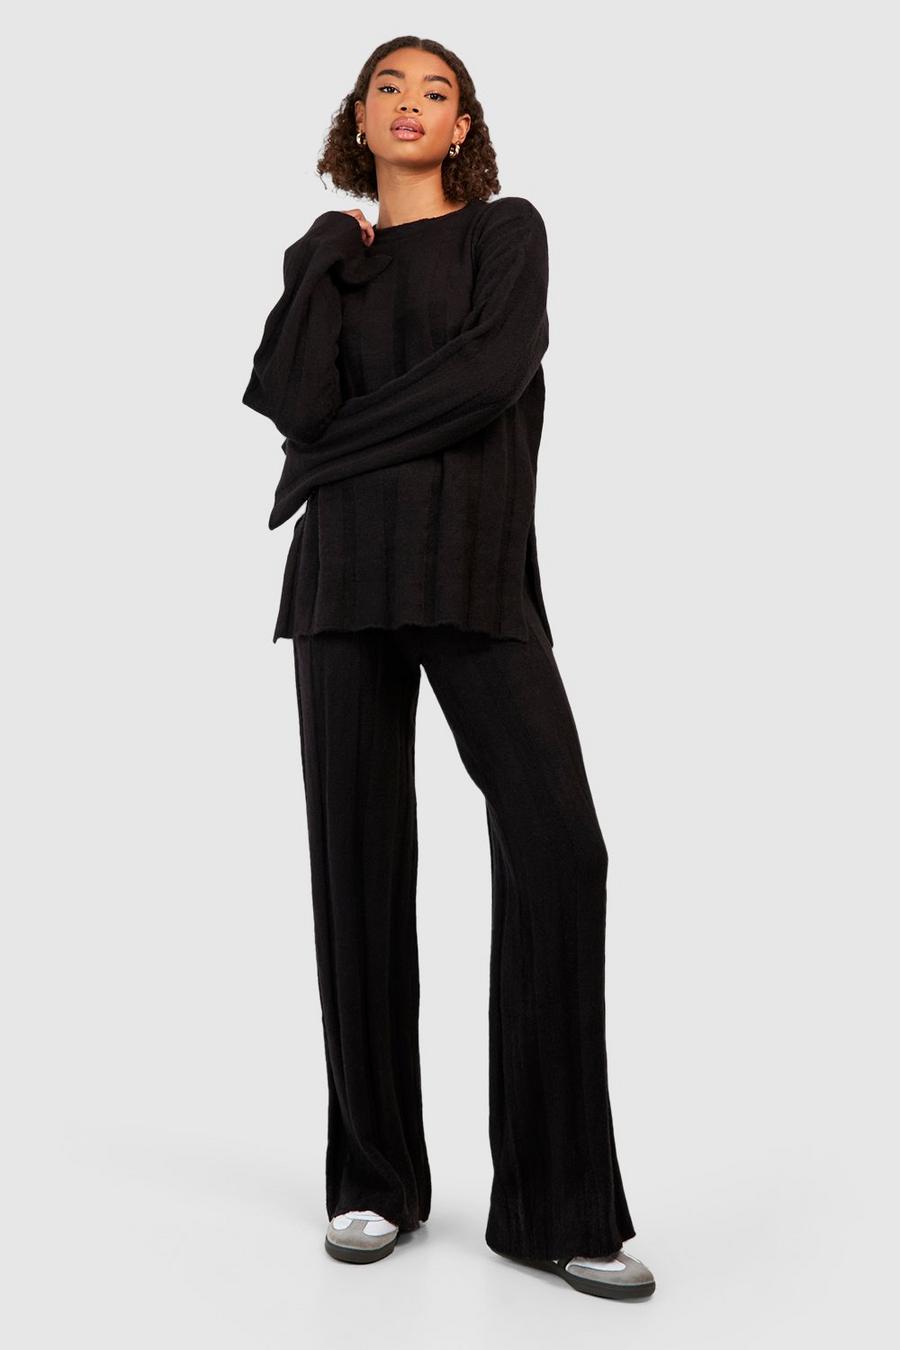 Black Tall Soft Knit Wide Rib Sweater And Flares Knitted Two-Piece